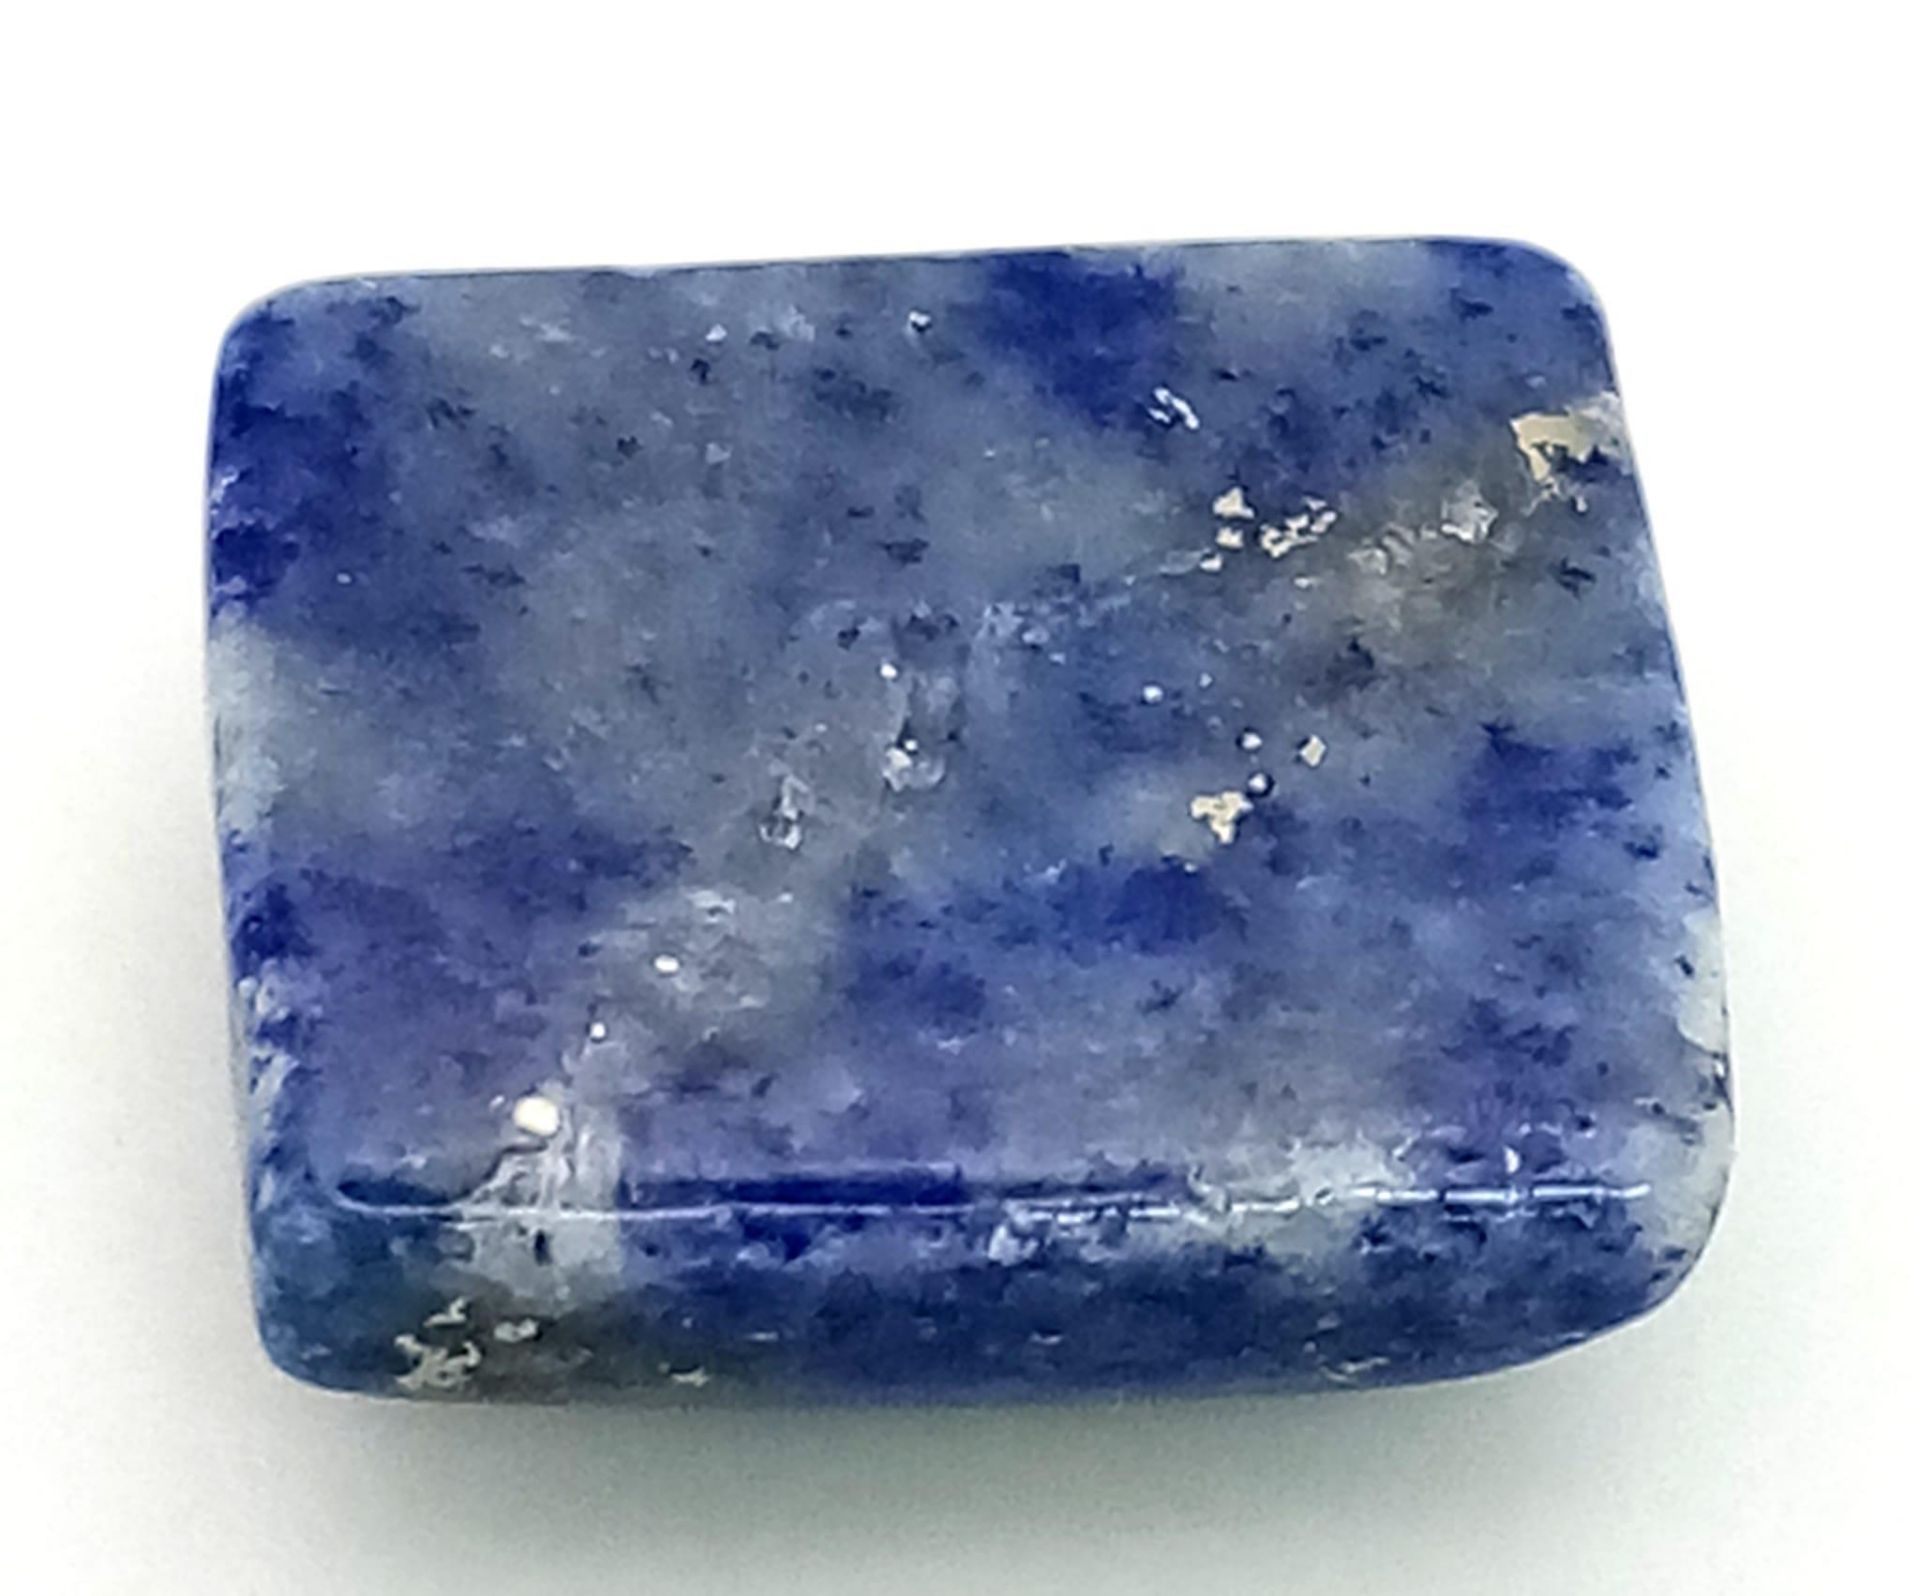 7.20ct of Square Cabochon Natural Lapis Lazuli. GLI Certification included. - Image 3 of 4